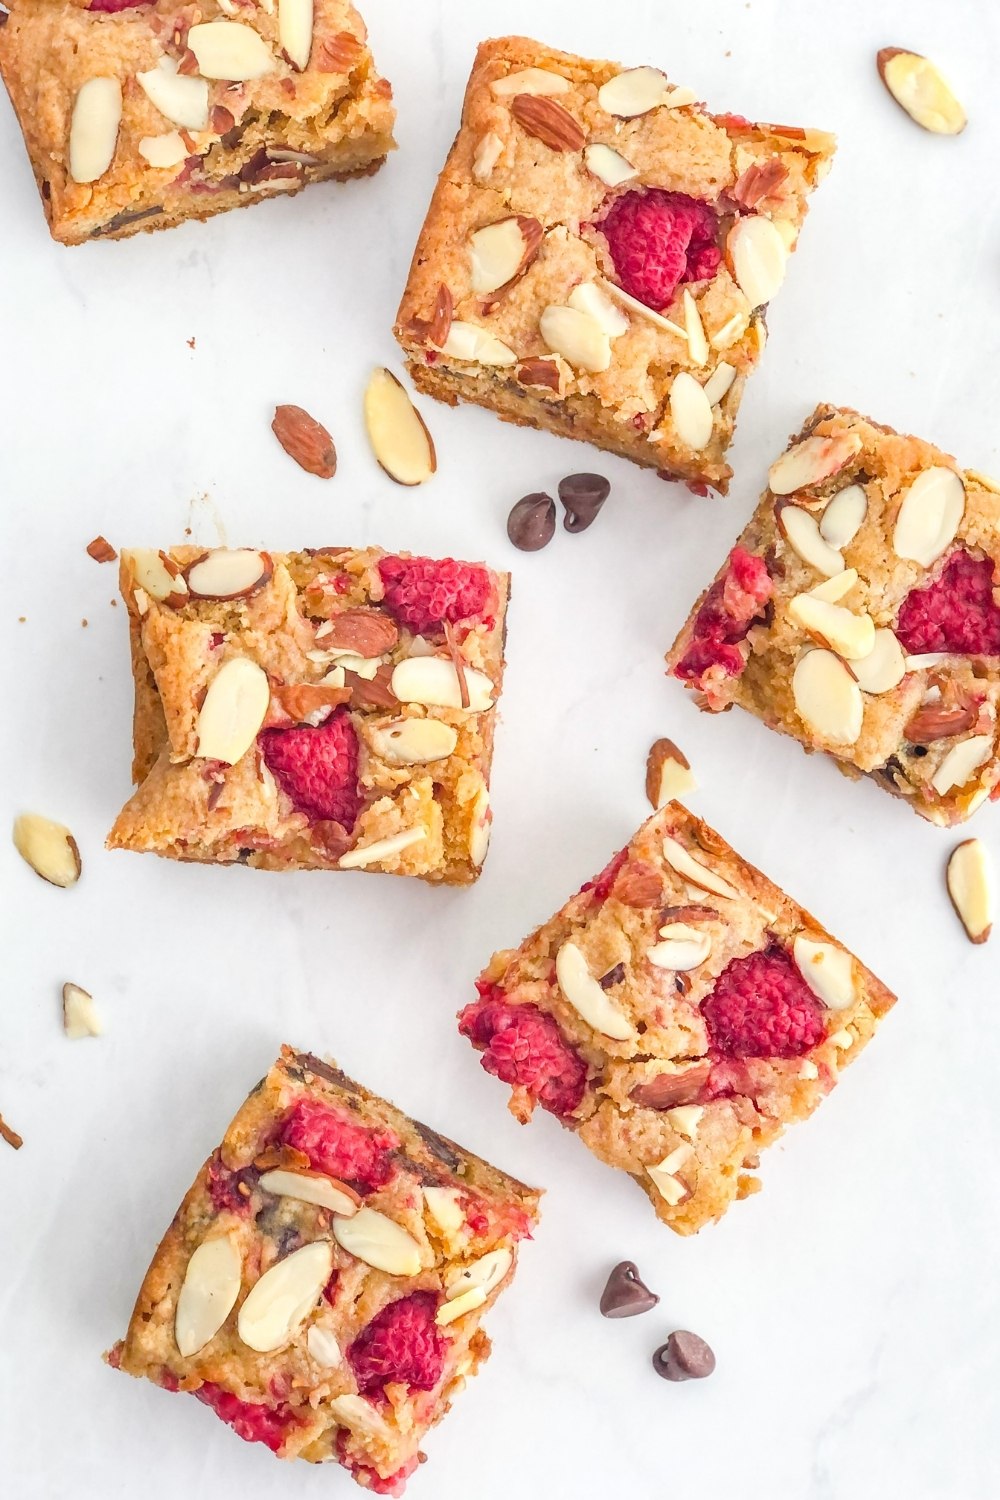 raspberry almond blondies with slivered almonds and dark chocolate chips on a marble surface